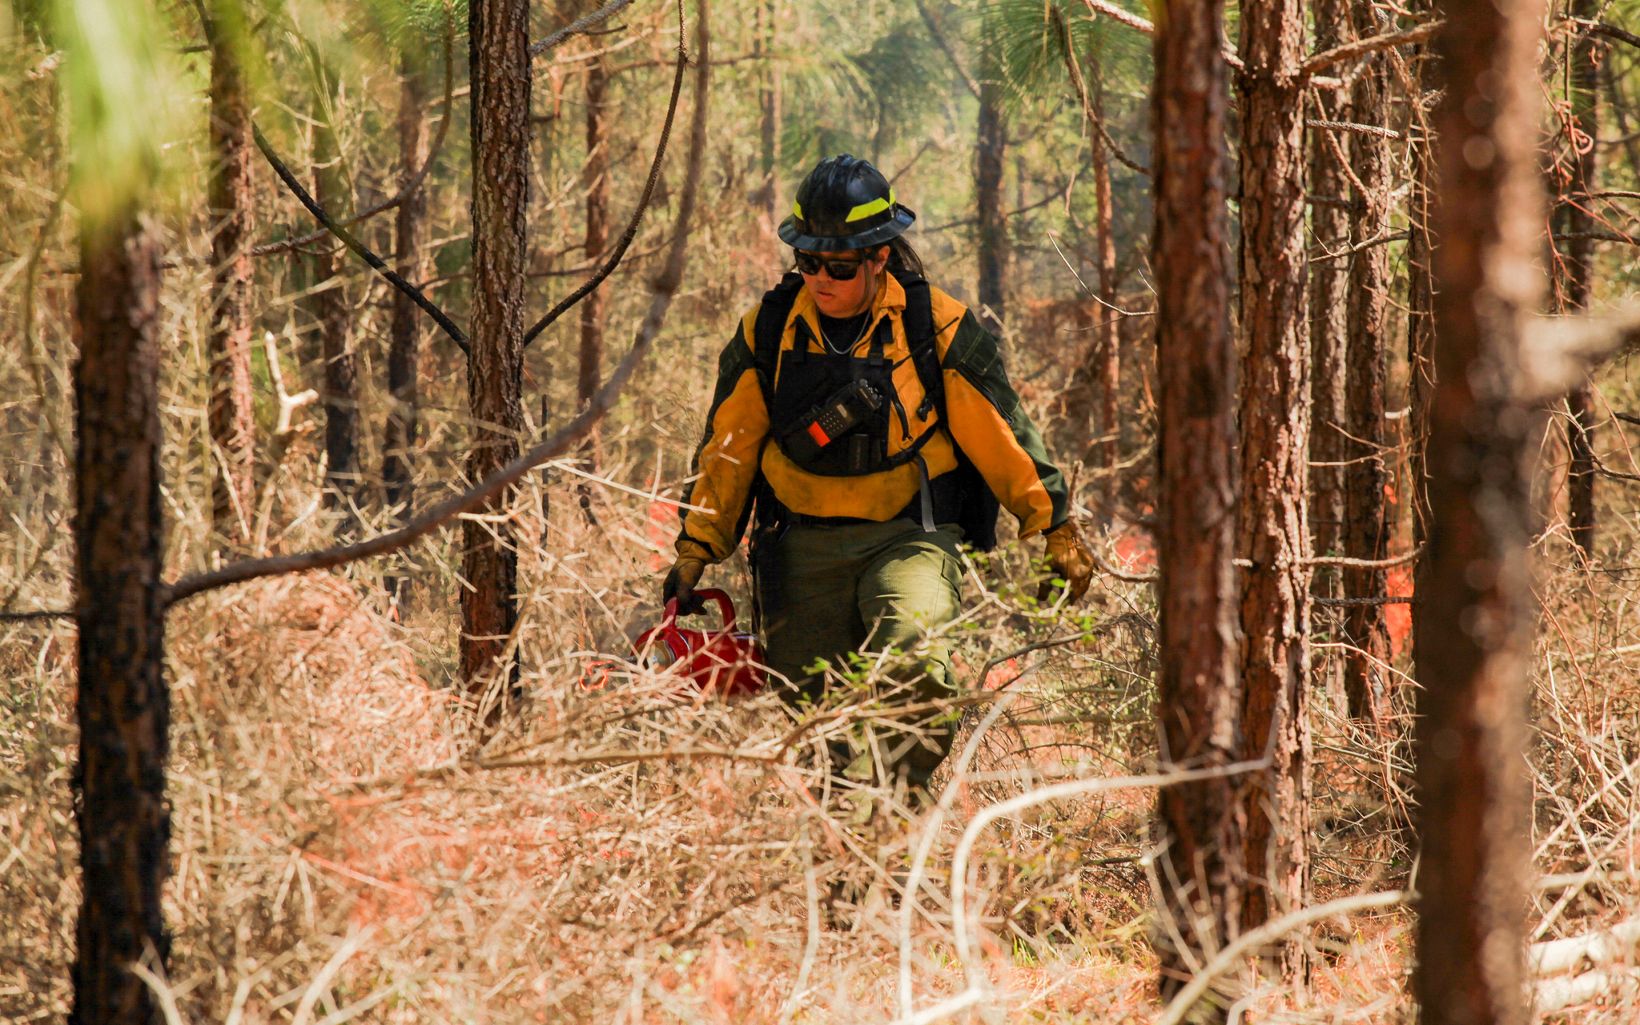 A female member of the Alabama-Coushatta Tribe of Texas Wildland Fire Management crew walks through a heavily forested area, lighting it on fire with a drip torch.